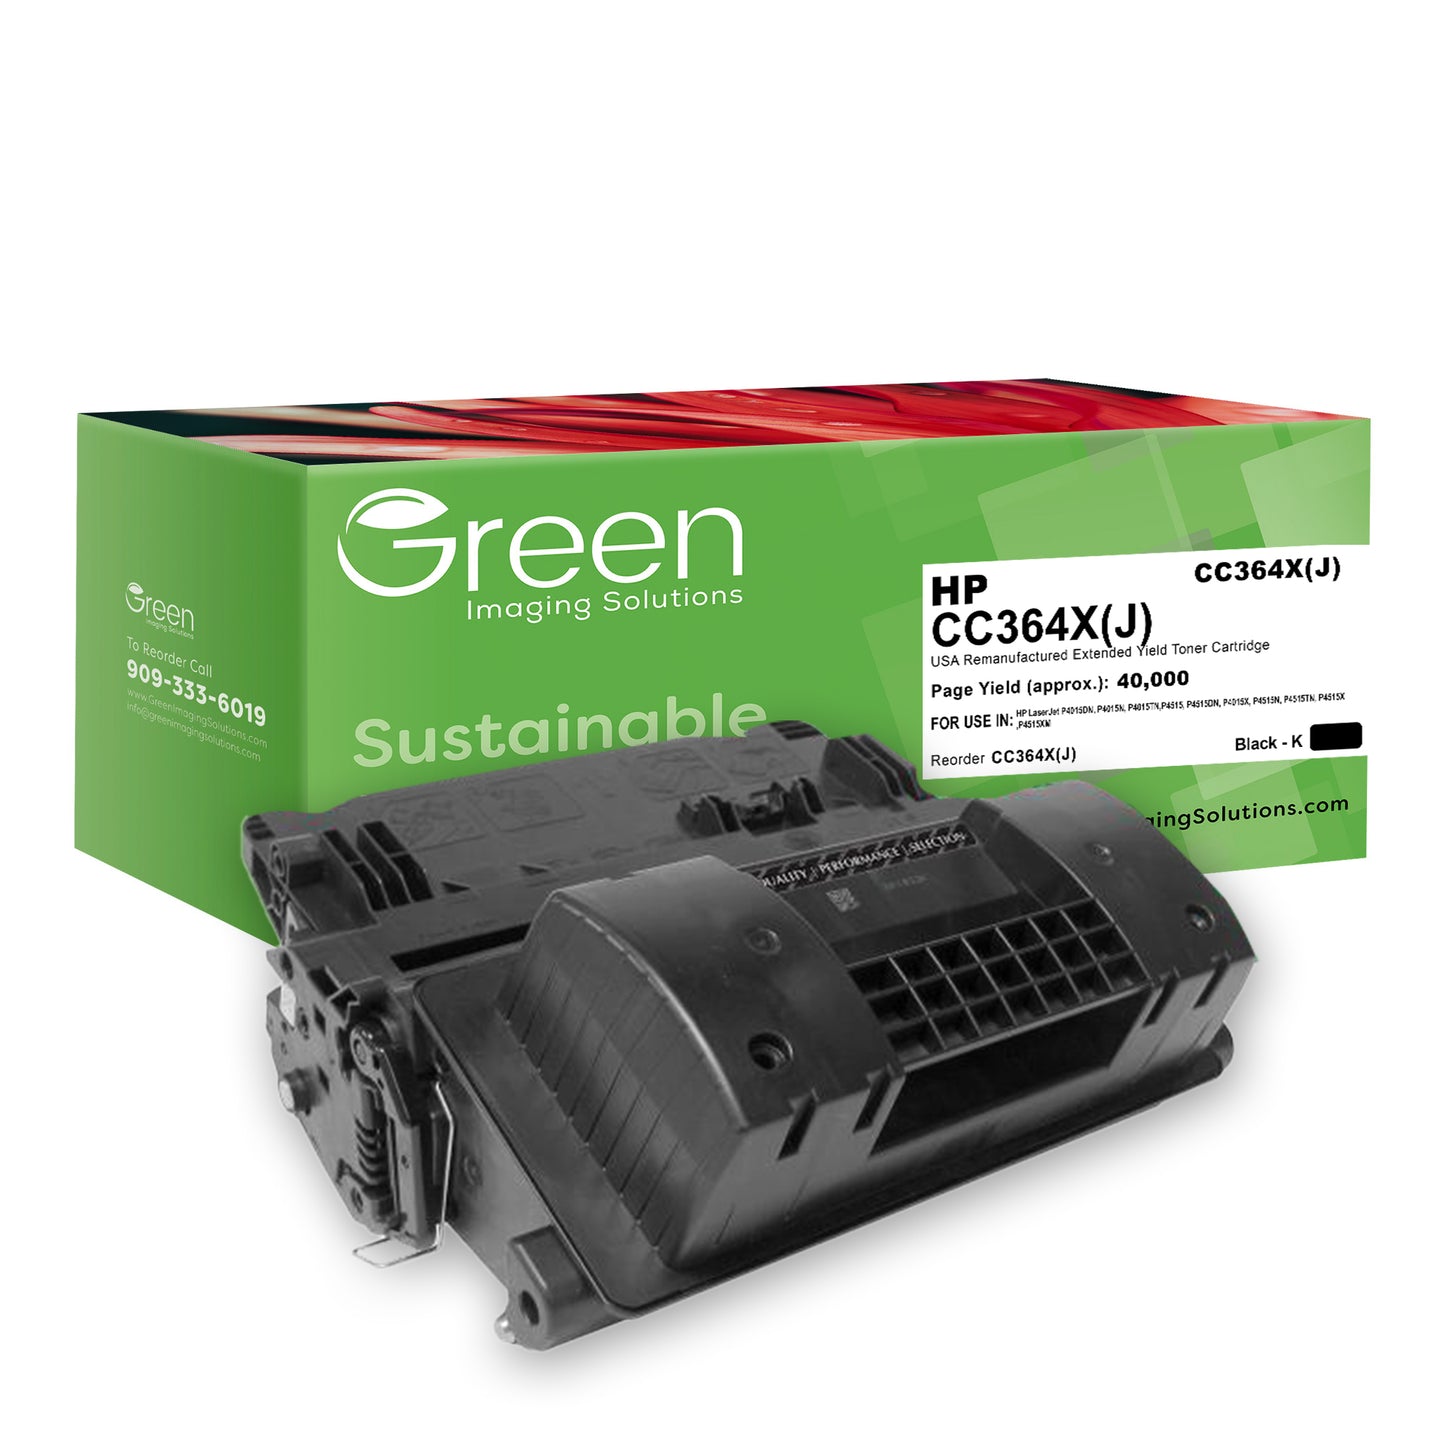 GIS USA Remanufactured Extended Yield Toner Cartridge for HP CC364X